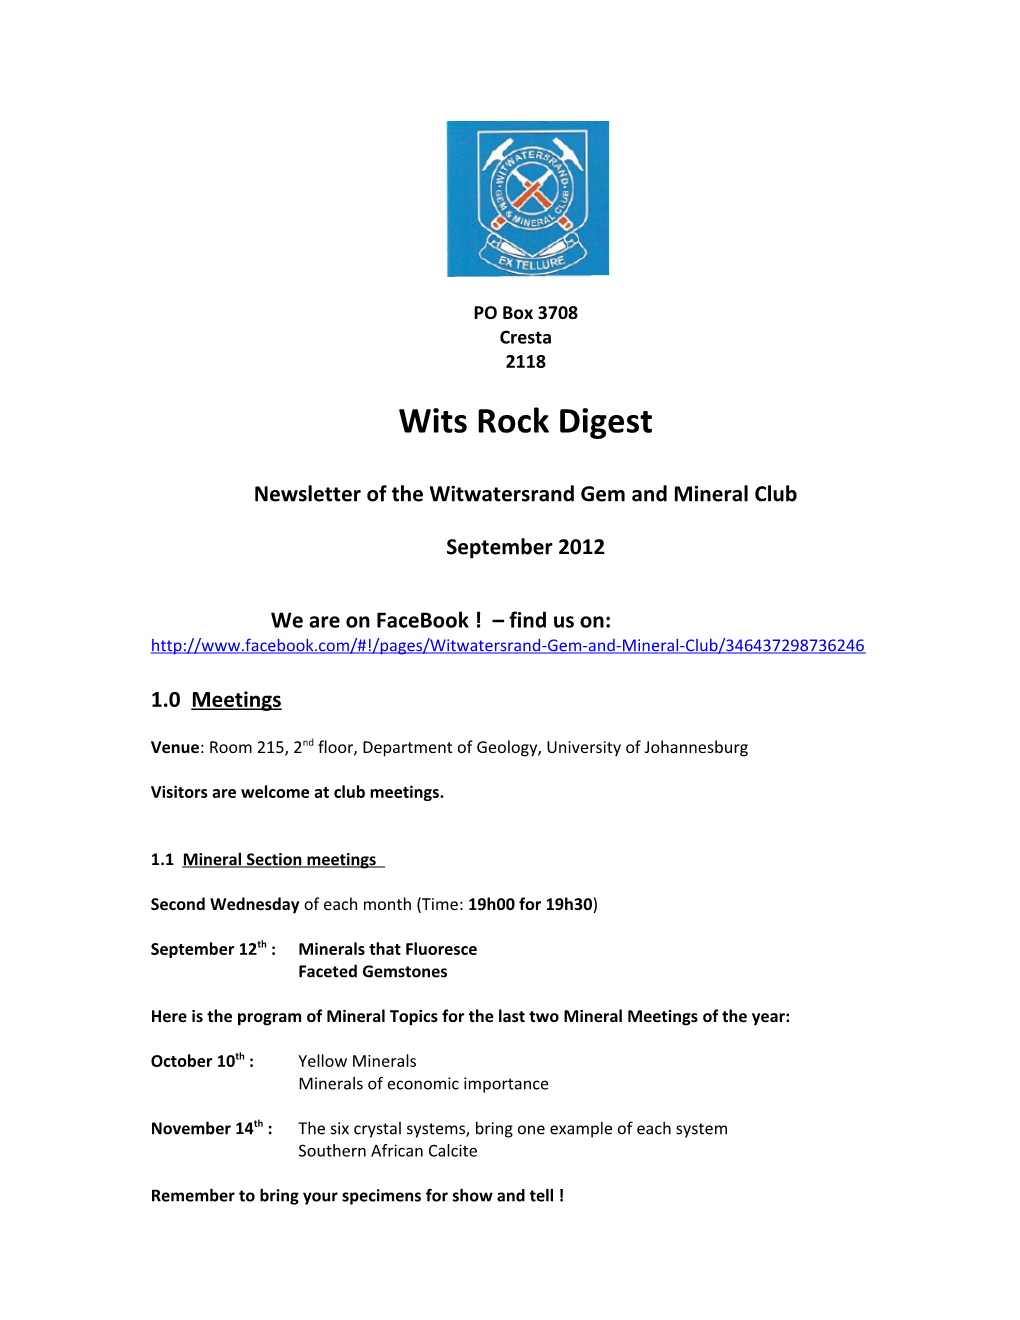 Newsletter of the Witwatersrand Gem and Mineral Club